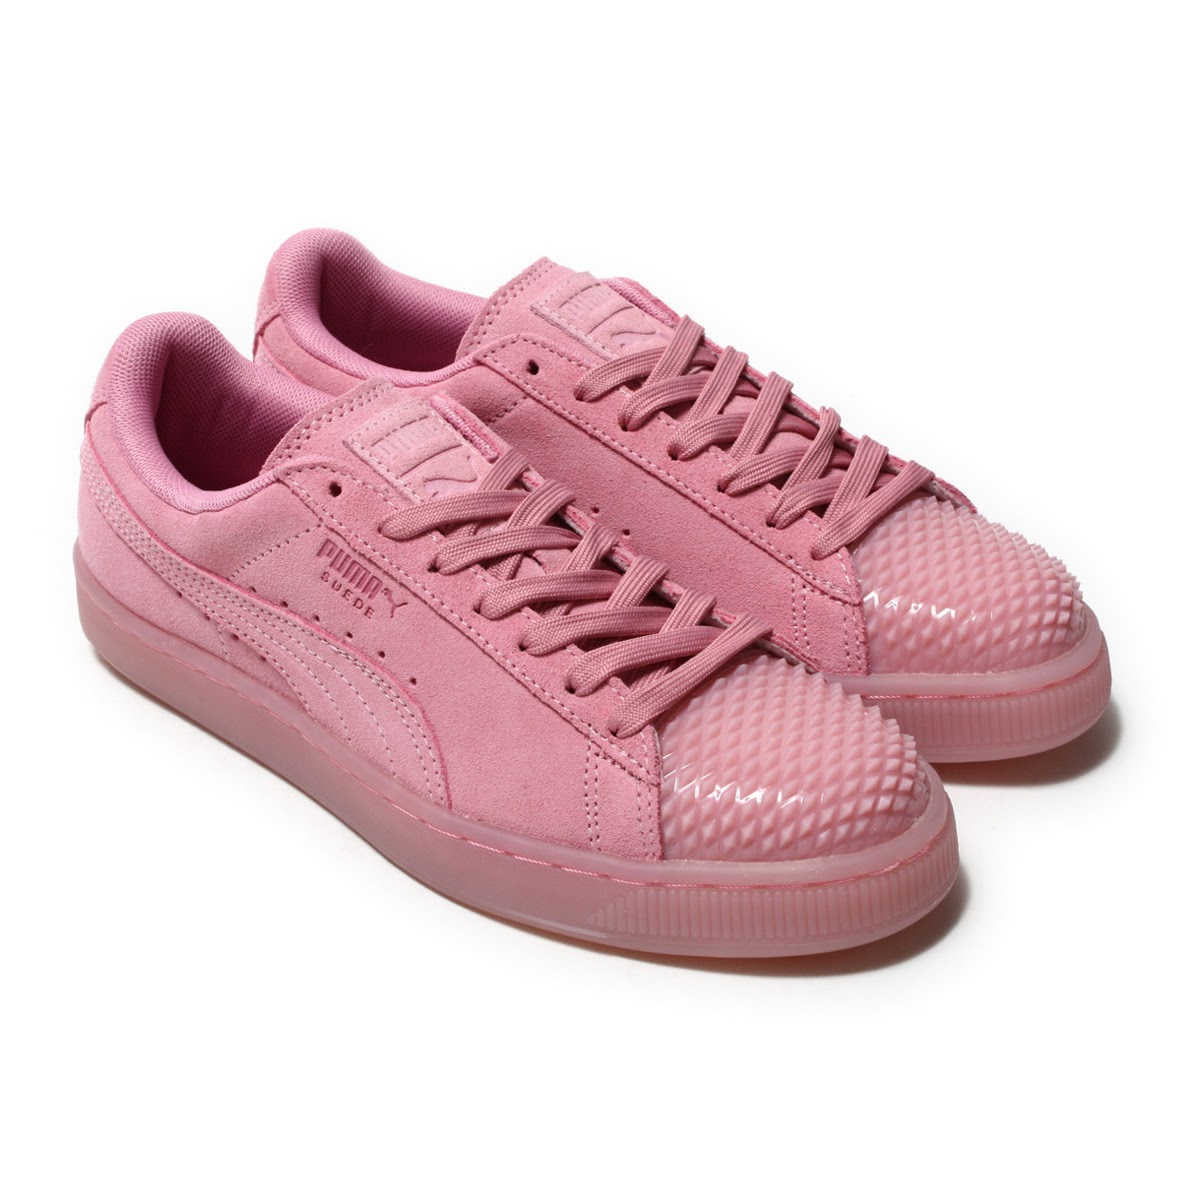 all pink suede pumas women's